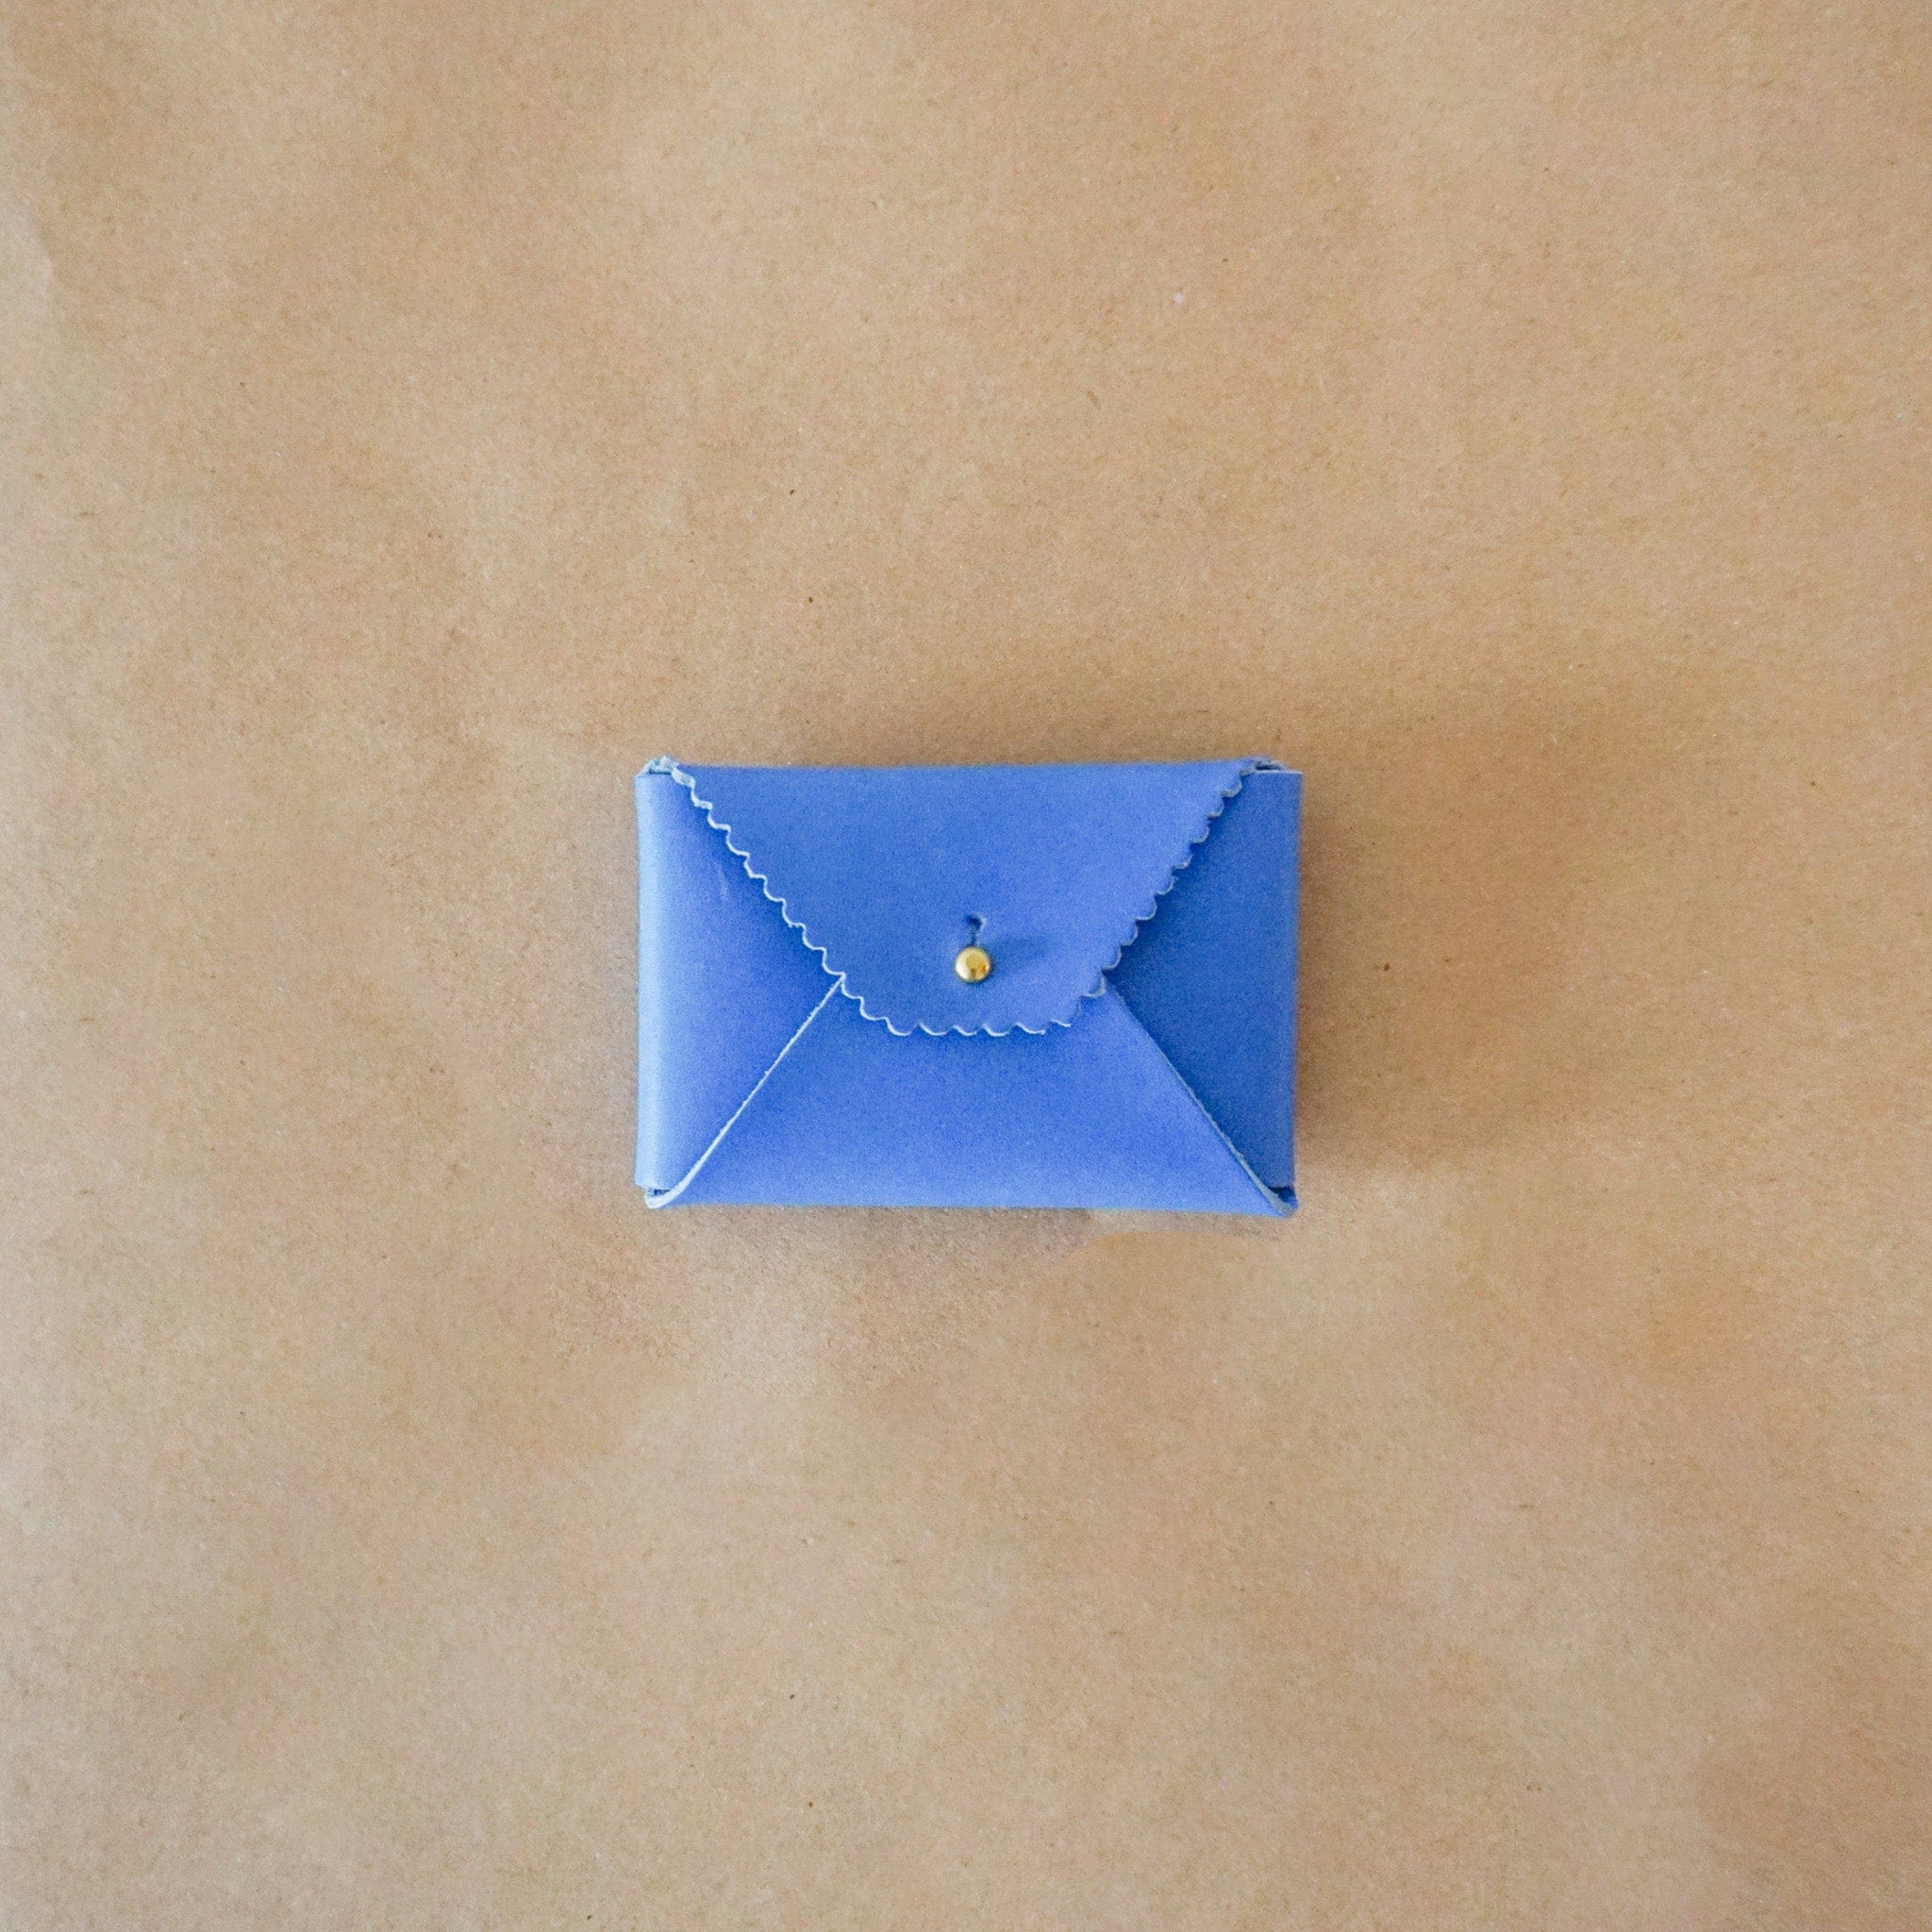 immodest cotton Apparel & Accessories Bright Blue Leather Credit Card Envelope - Bright Blue